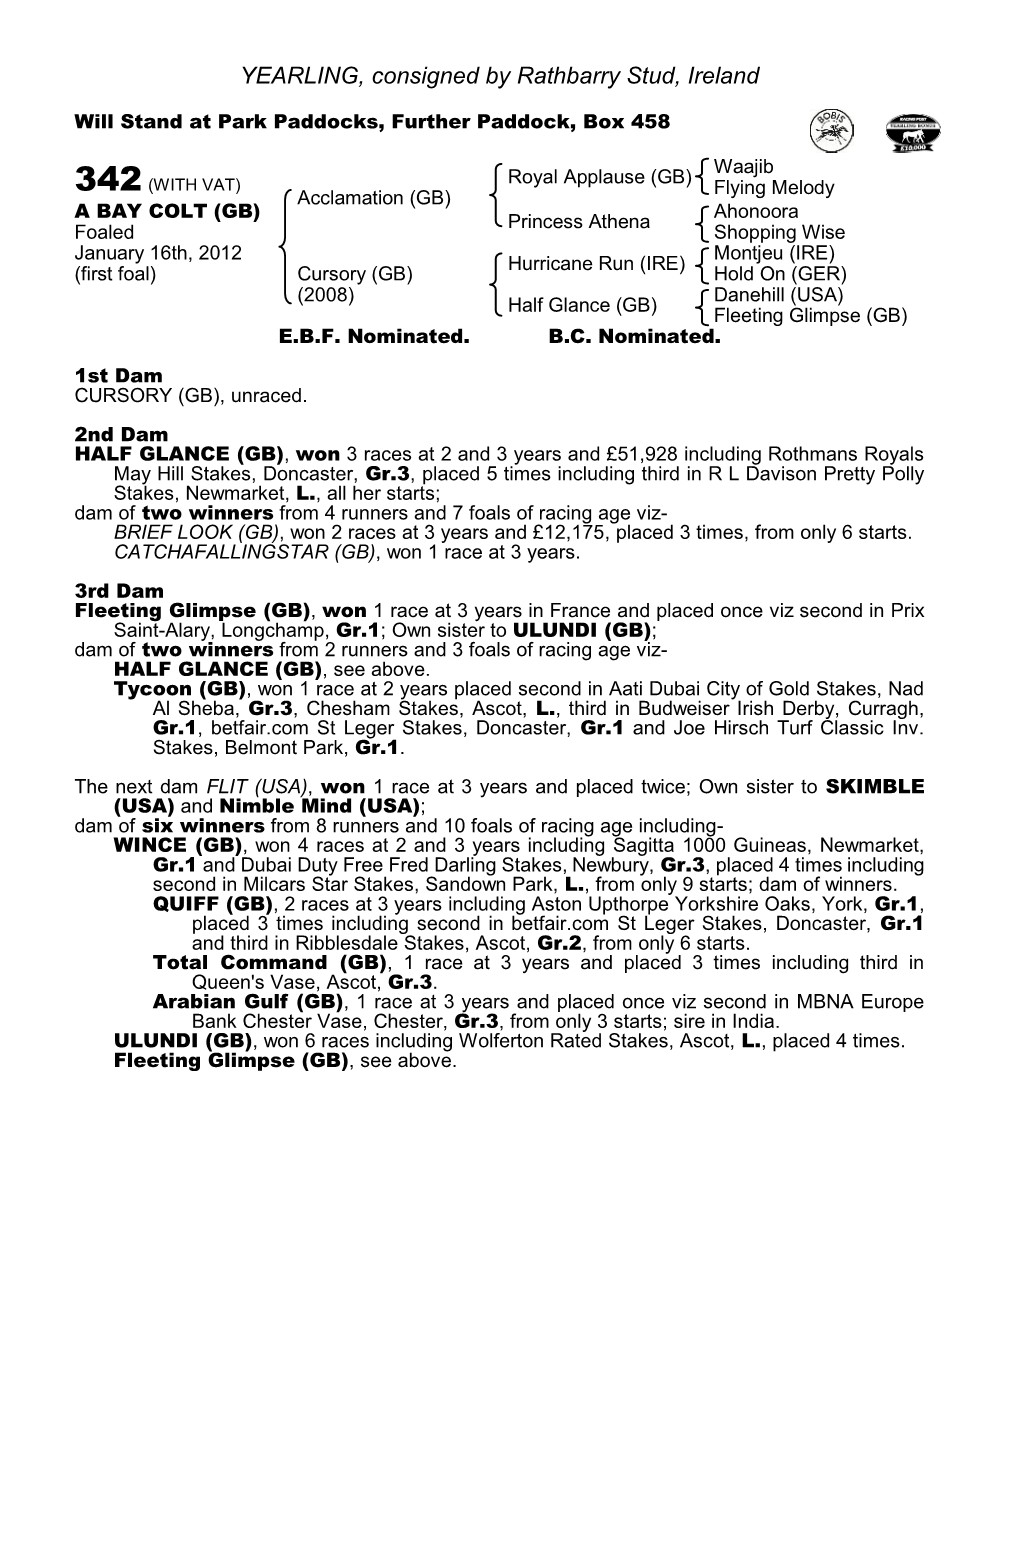 YEARLING, Consigned by Rathbarry Stud, Ireland